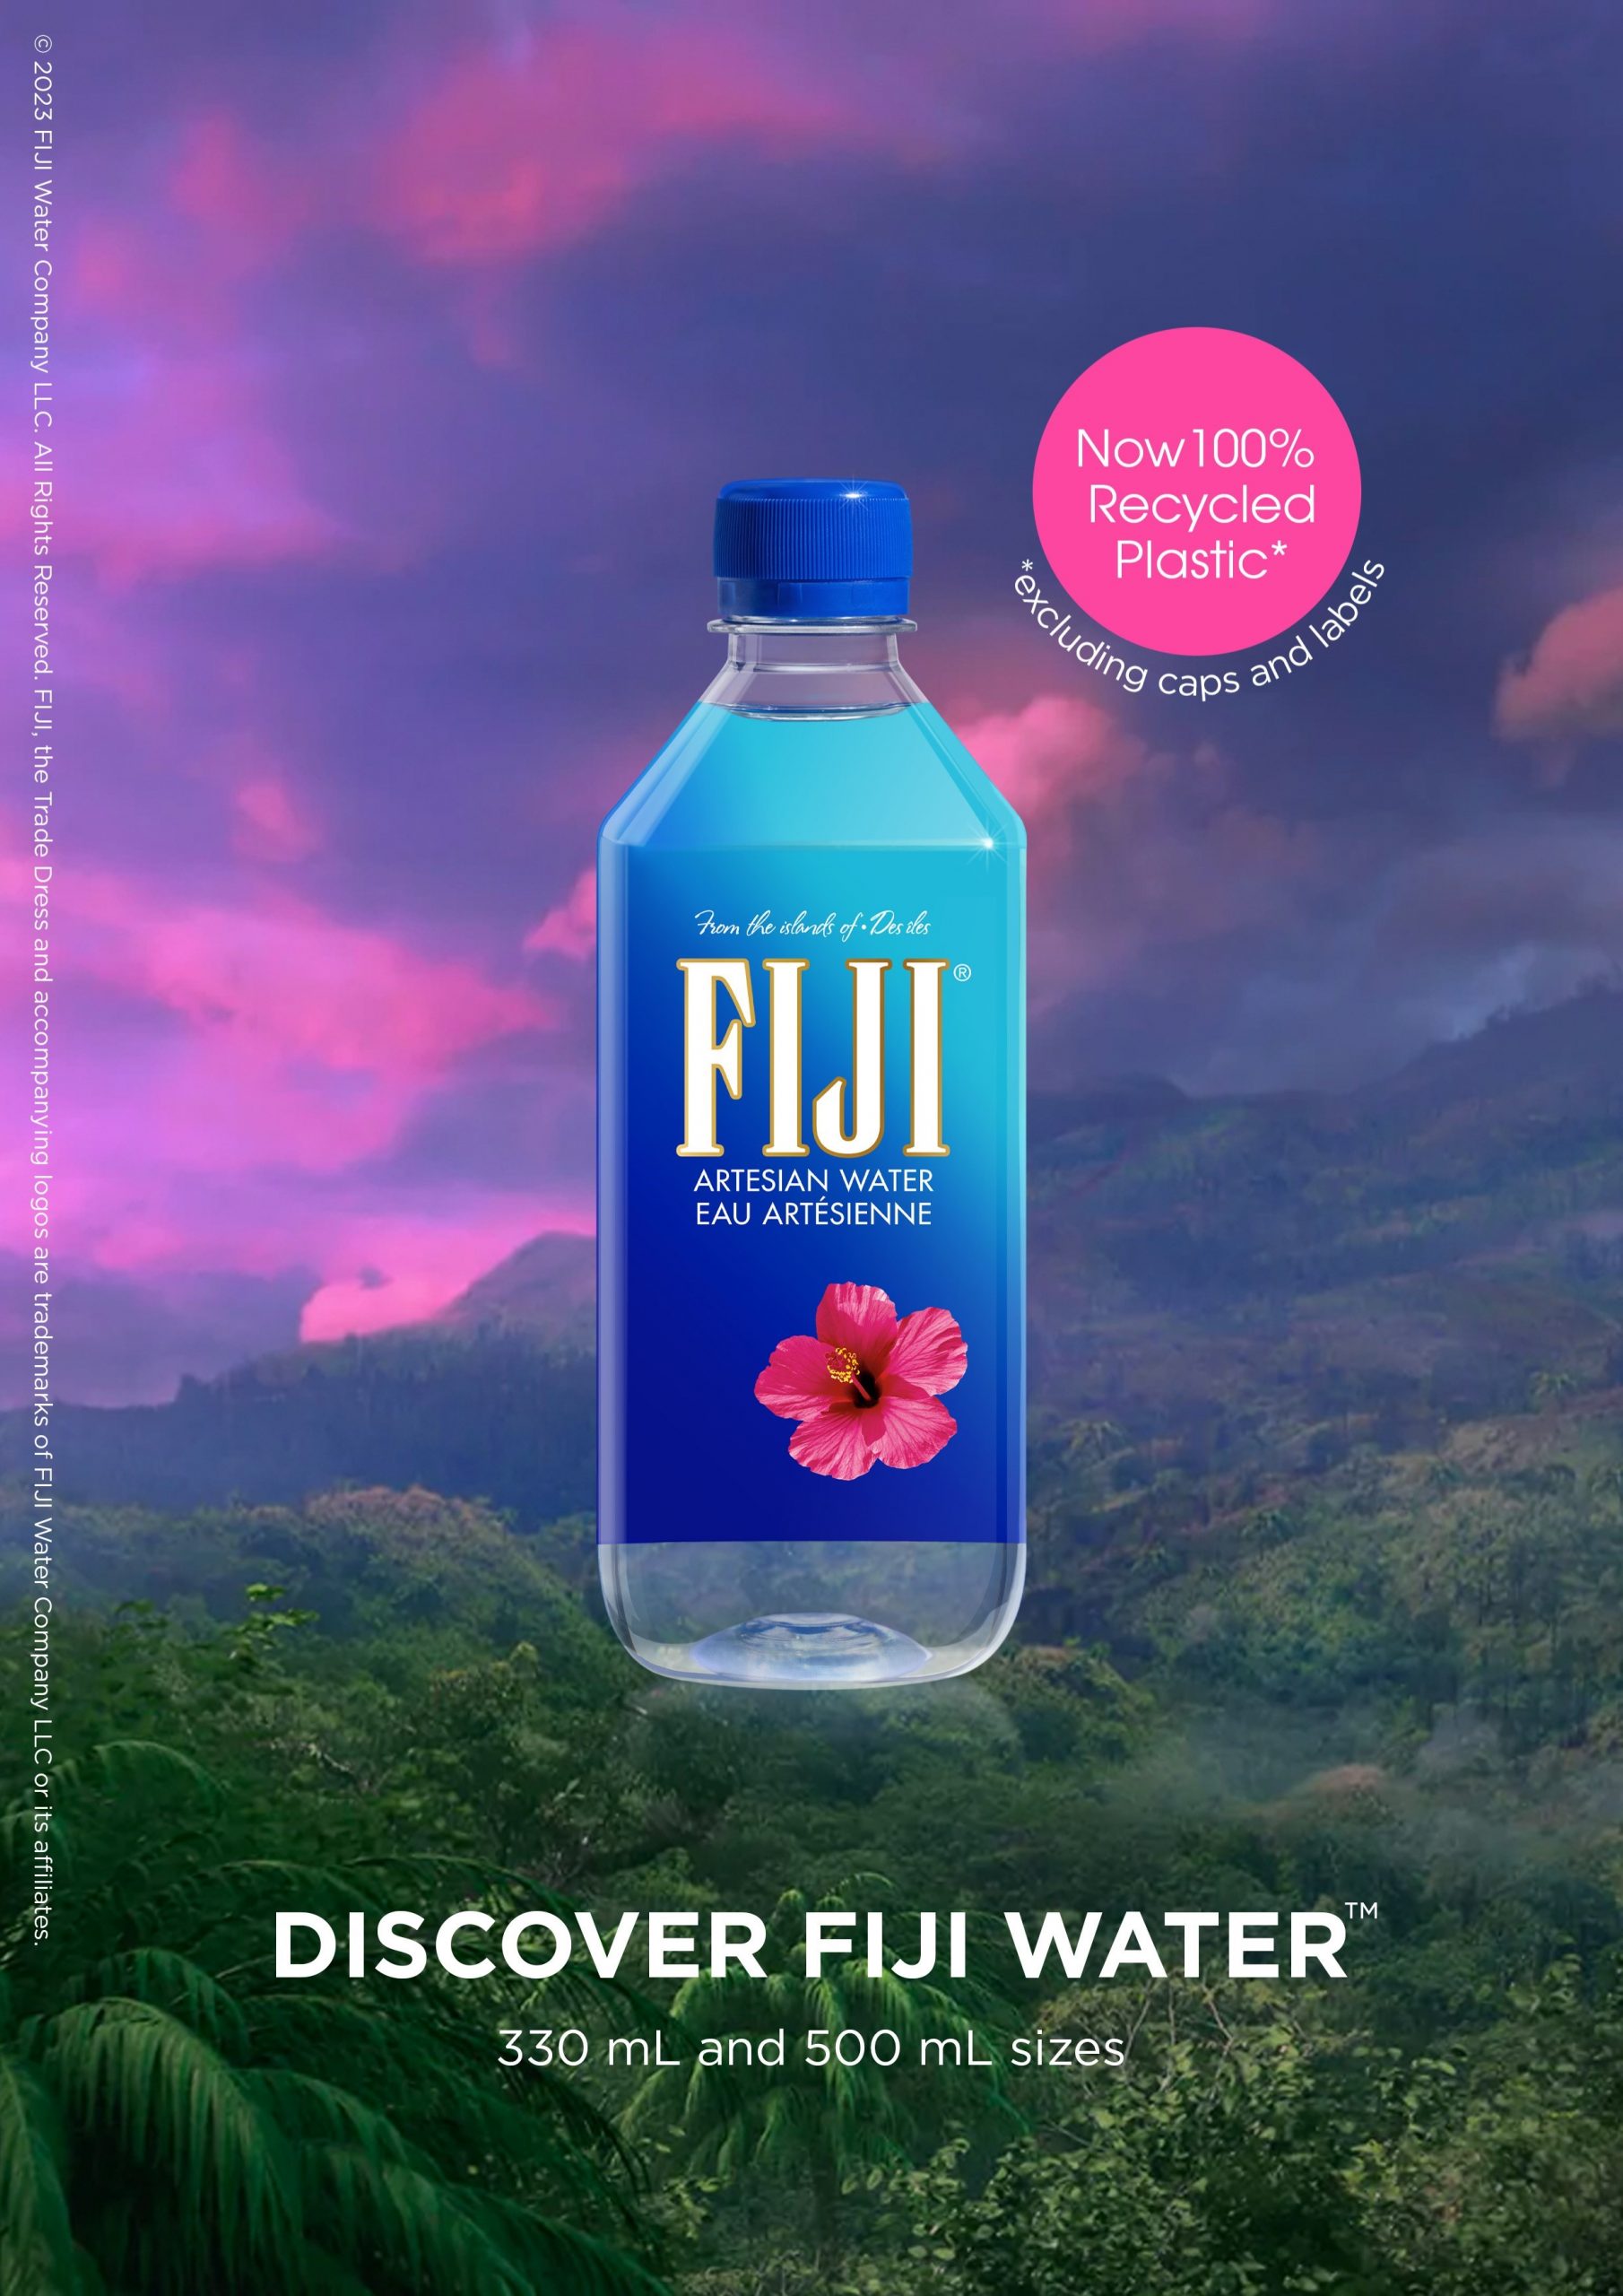 FIJI Water Introduces 100% Recycled Plastic Bottles at National Film ...